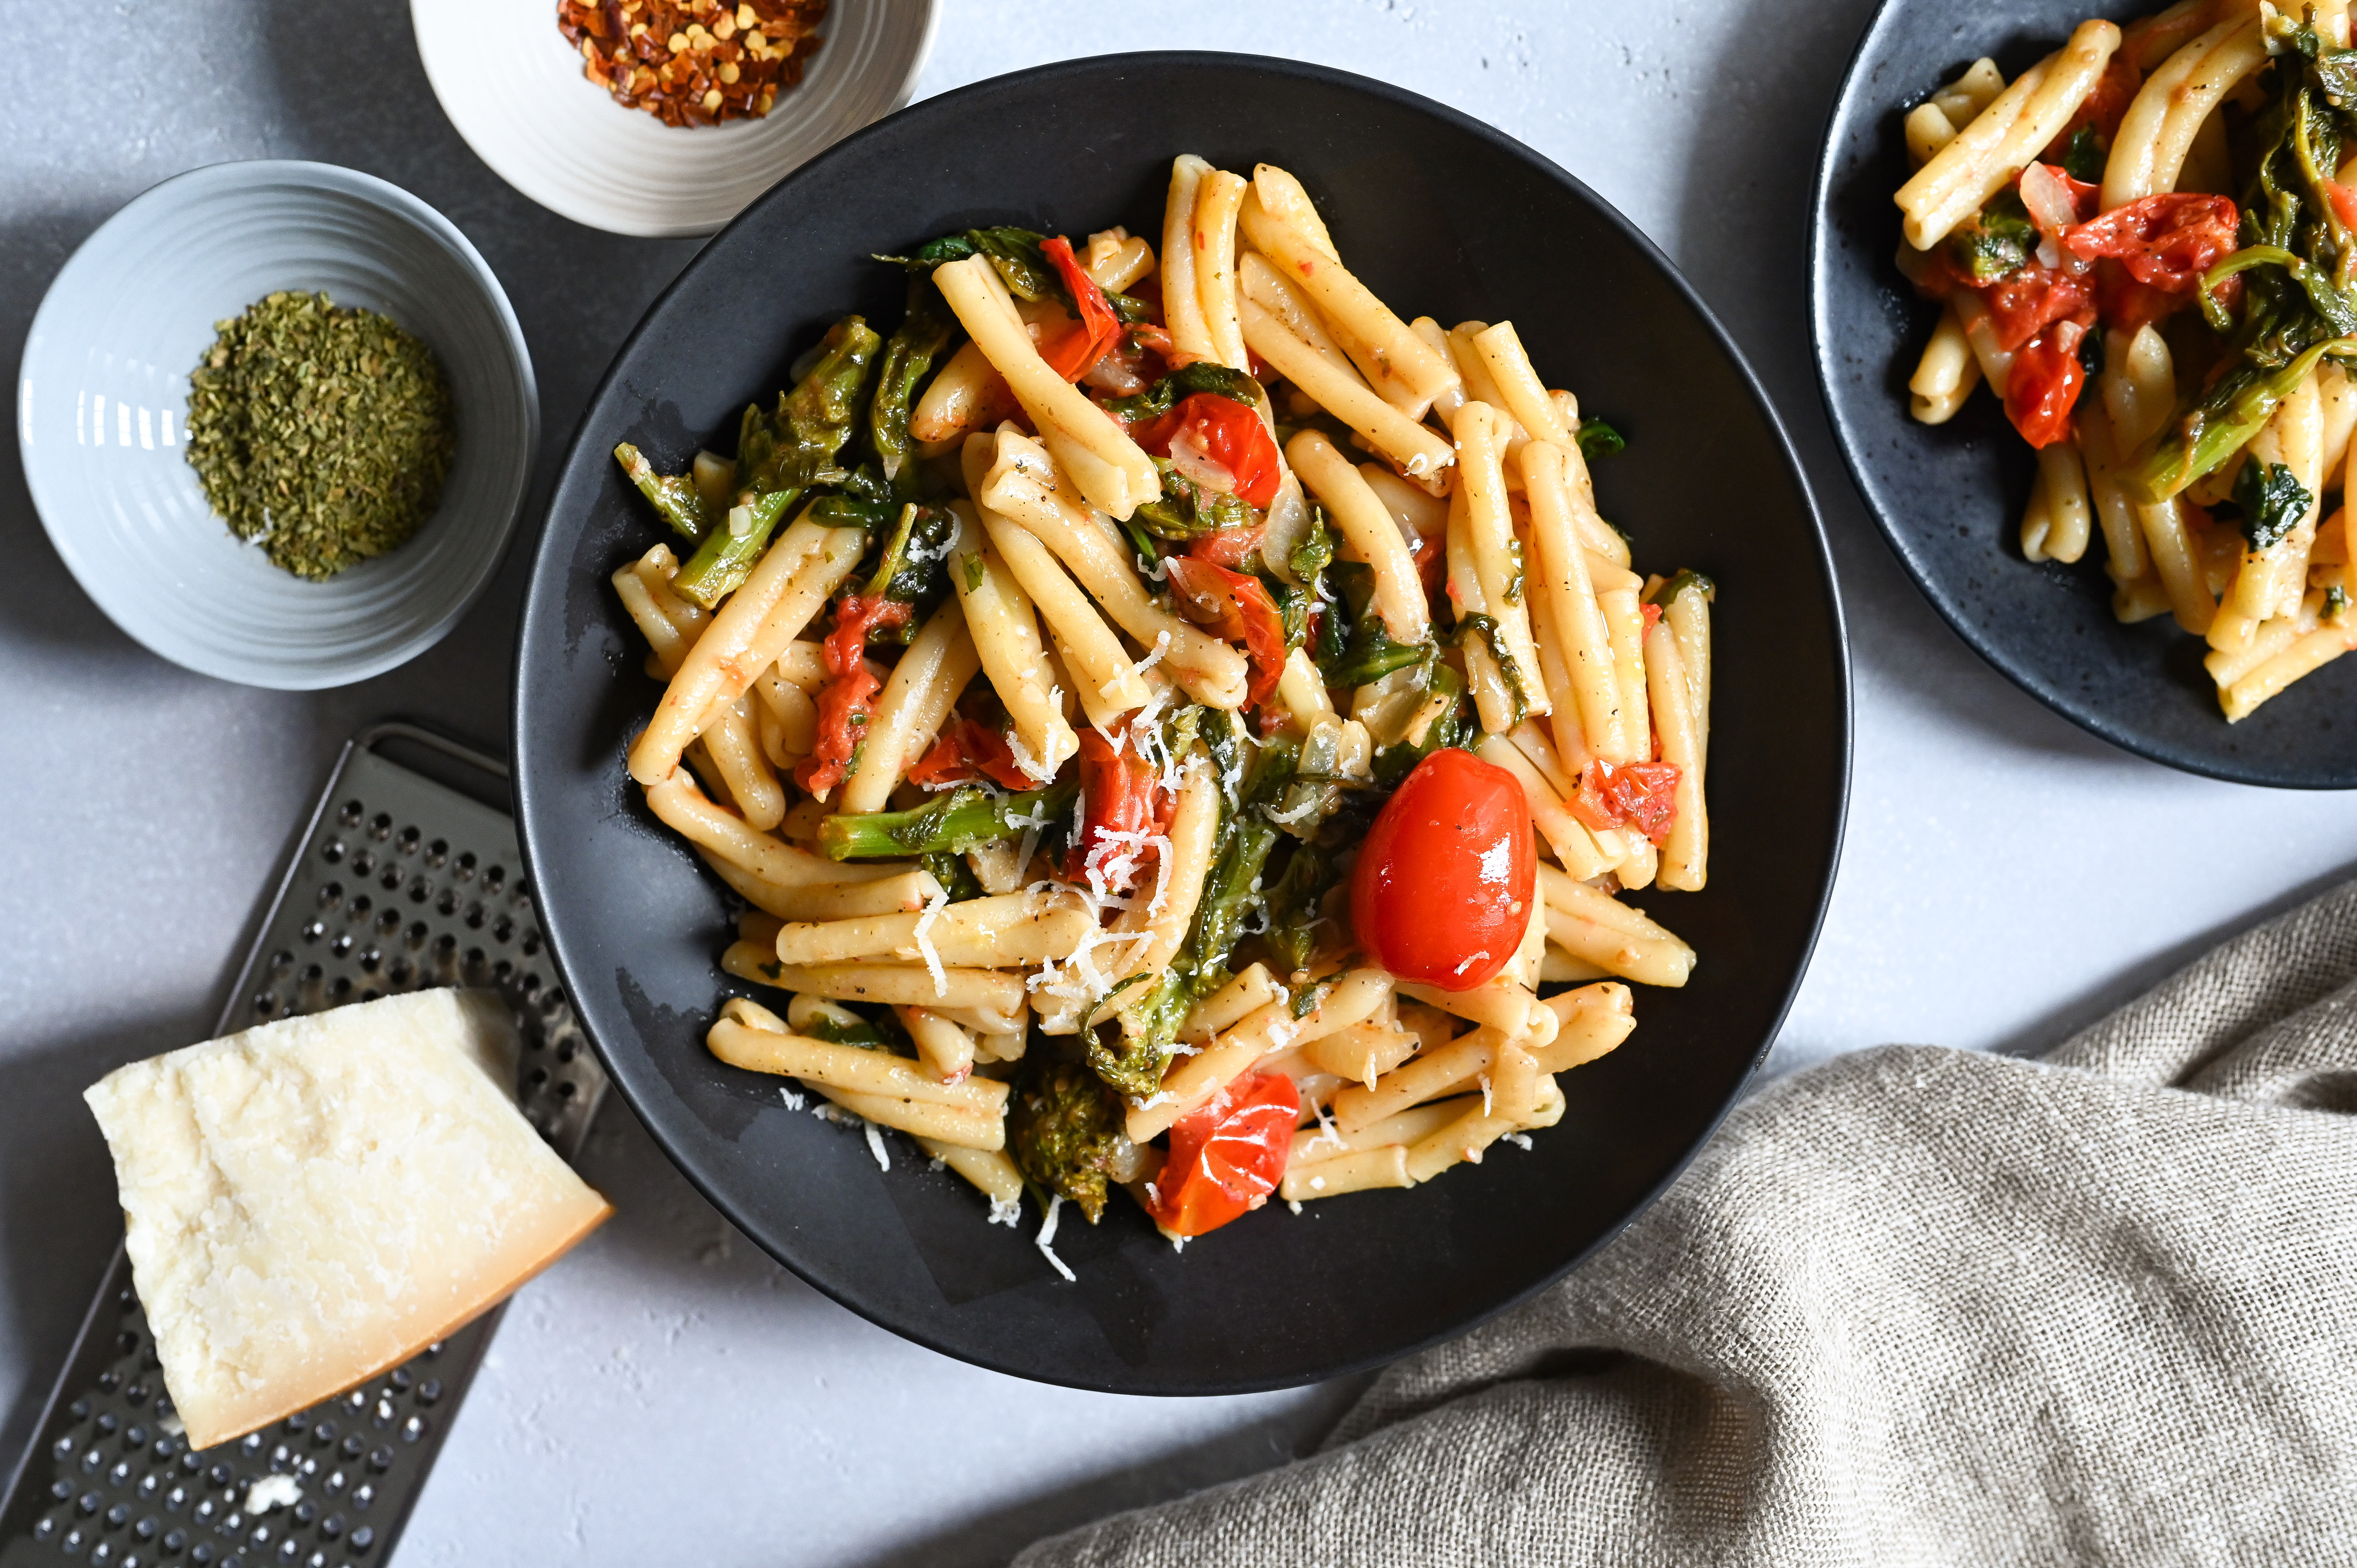 Pasta with cherry tomatoes and greens